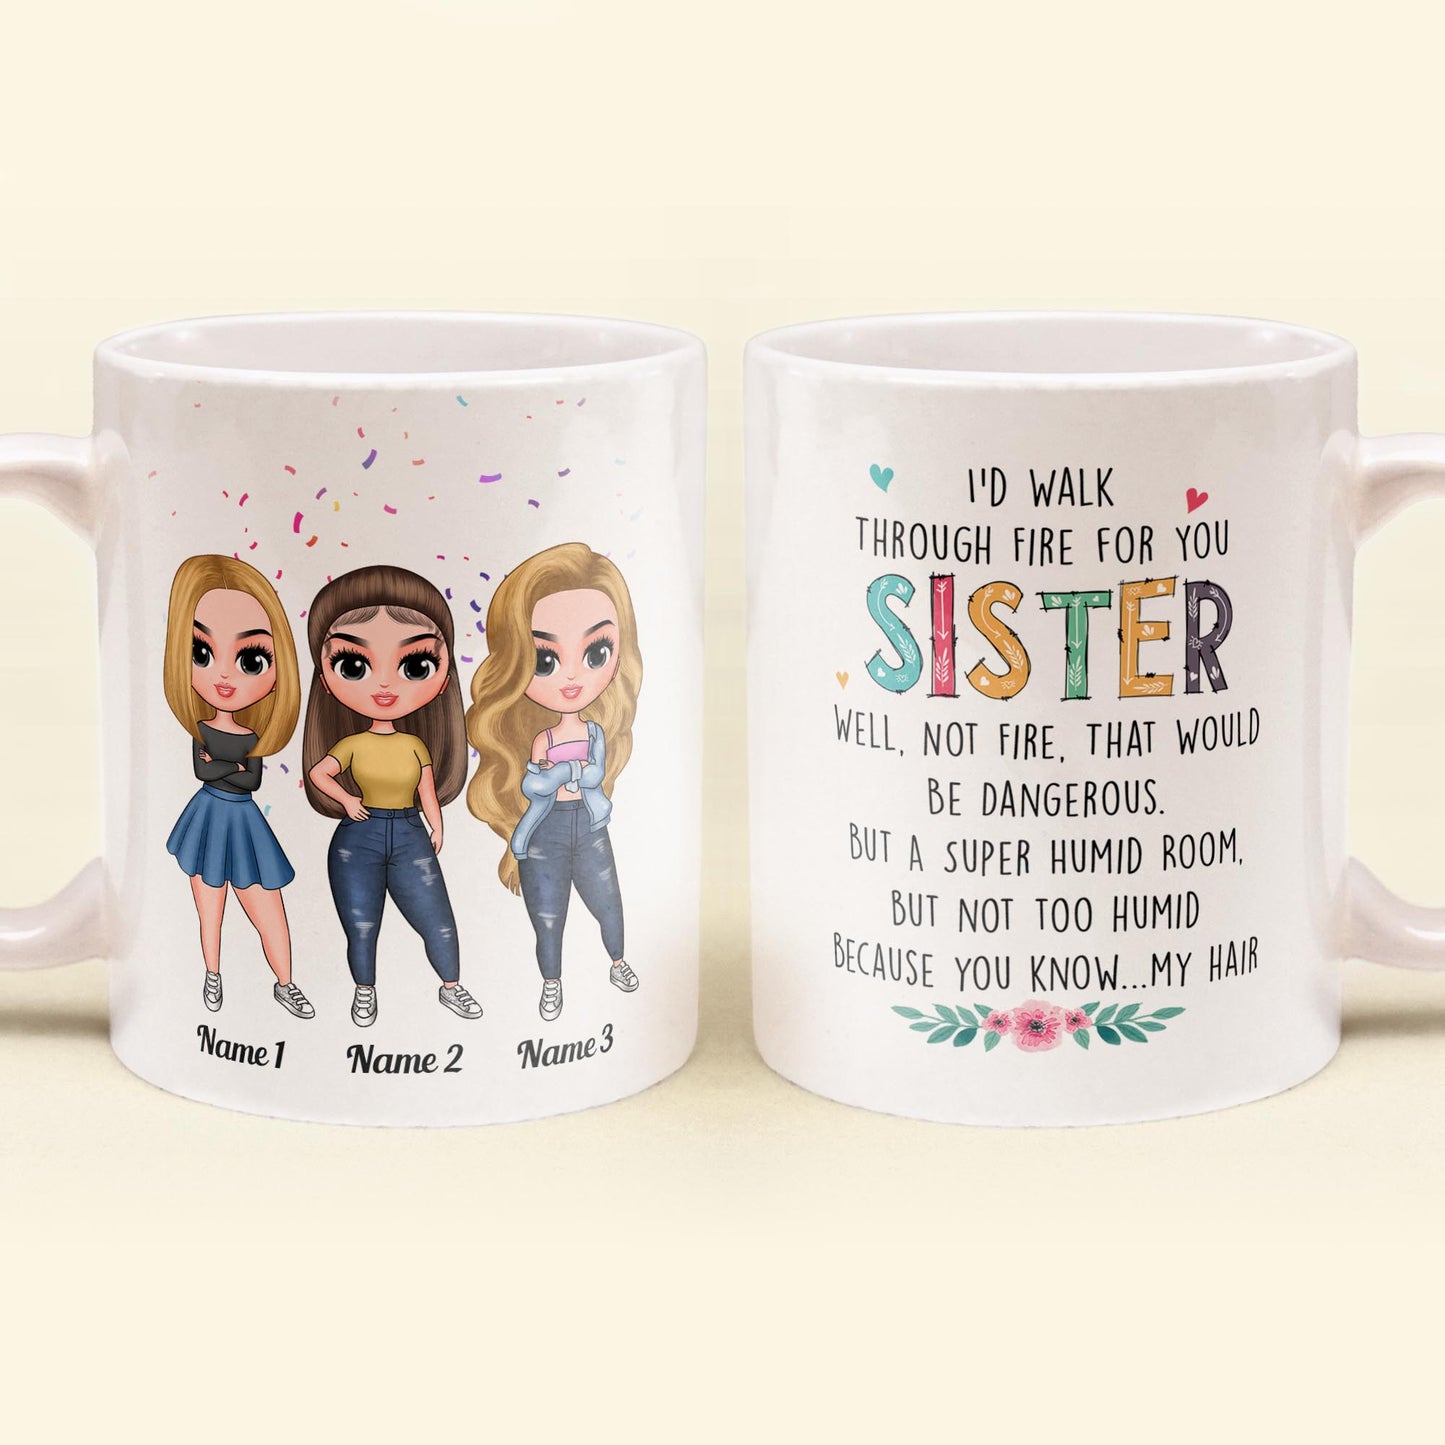 I'D Walk Through Fire For You Sister - Personalized Mug - Birthday, Christmas Gift For Sisters